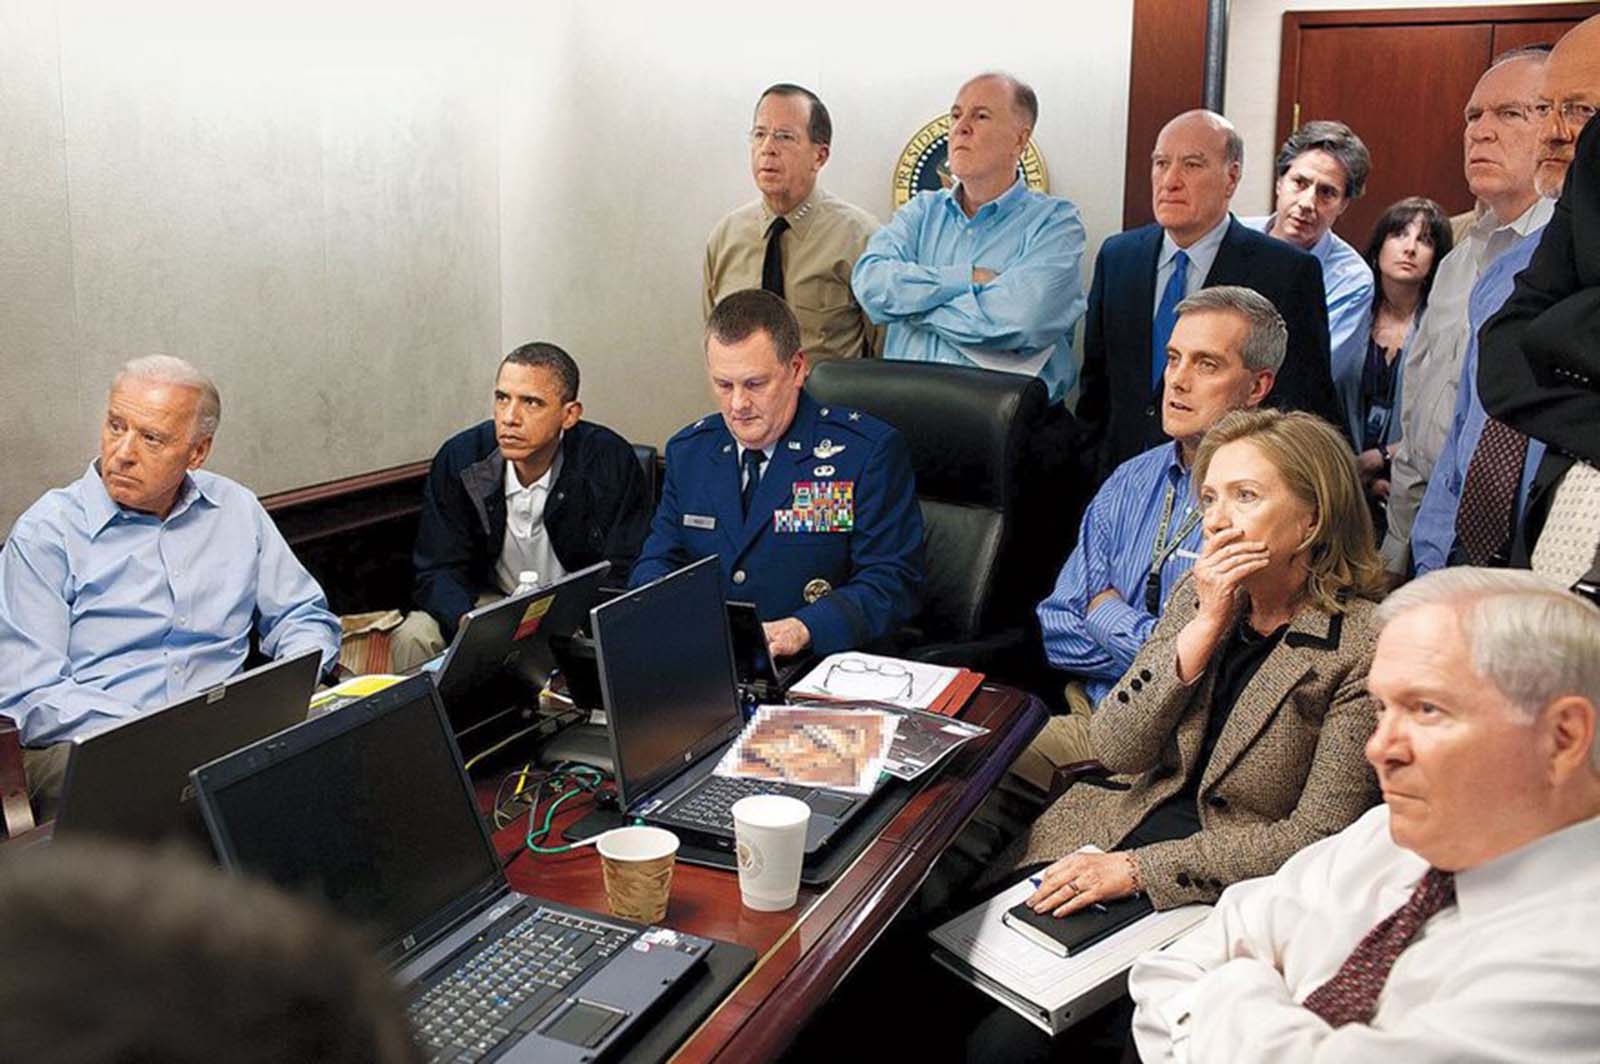 The Situation Room, 2011